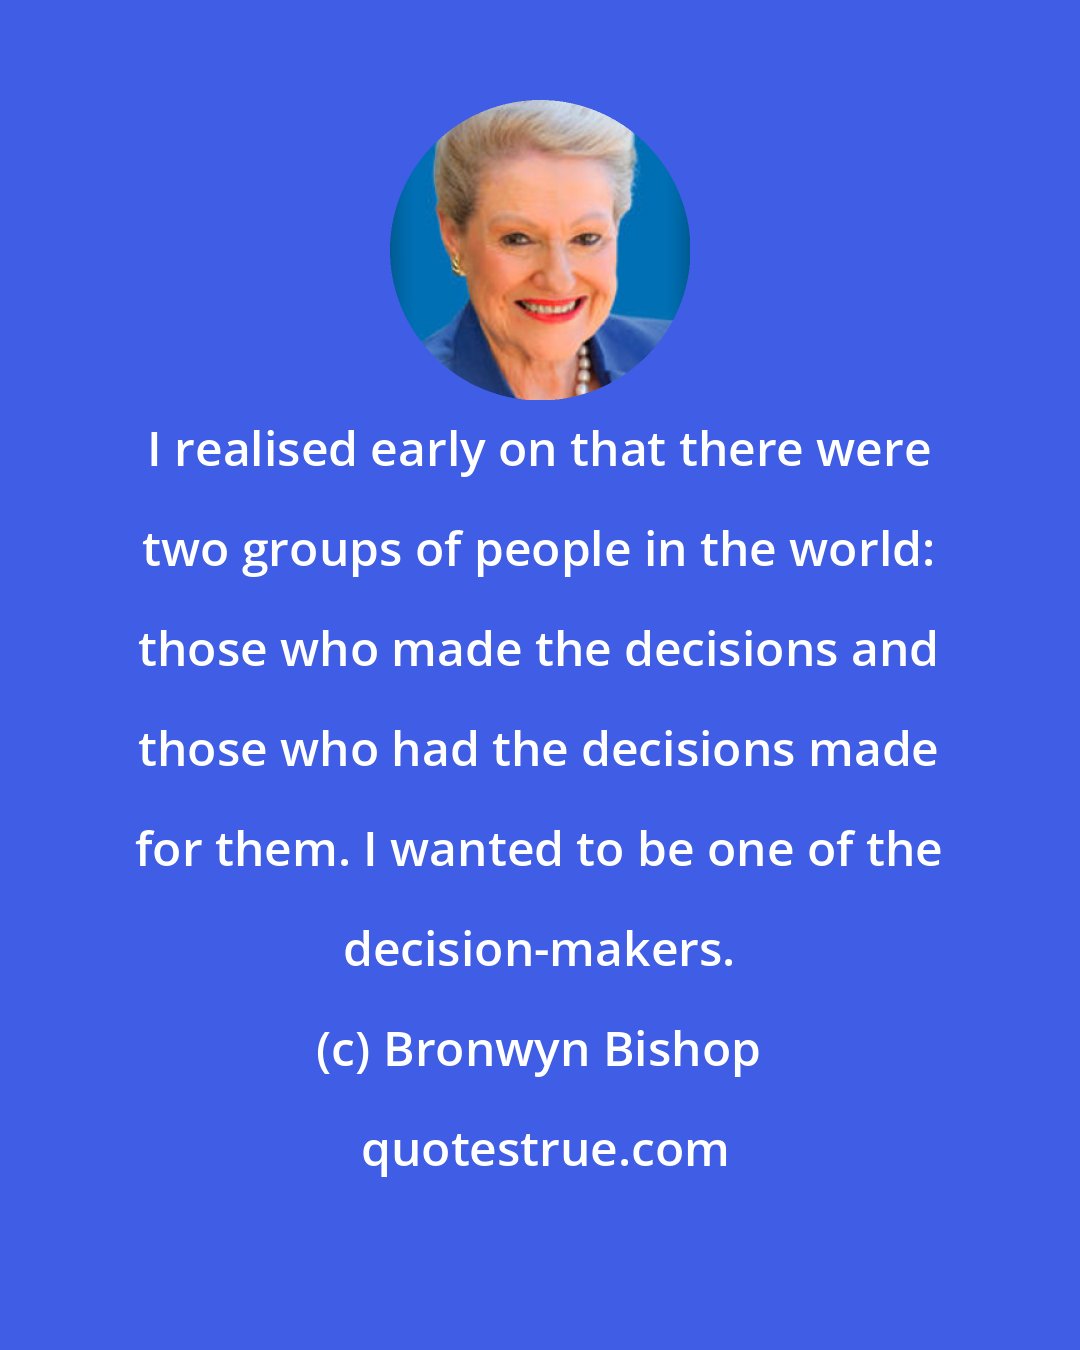 Bronwyn Bishop: I realised early on that there were two groups of people in the world: those who made the decisions and those who had the decisions made for them. I wanted to be one of the decision-makers.